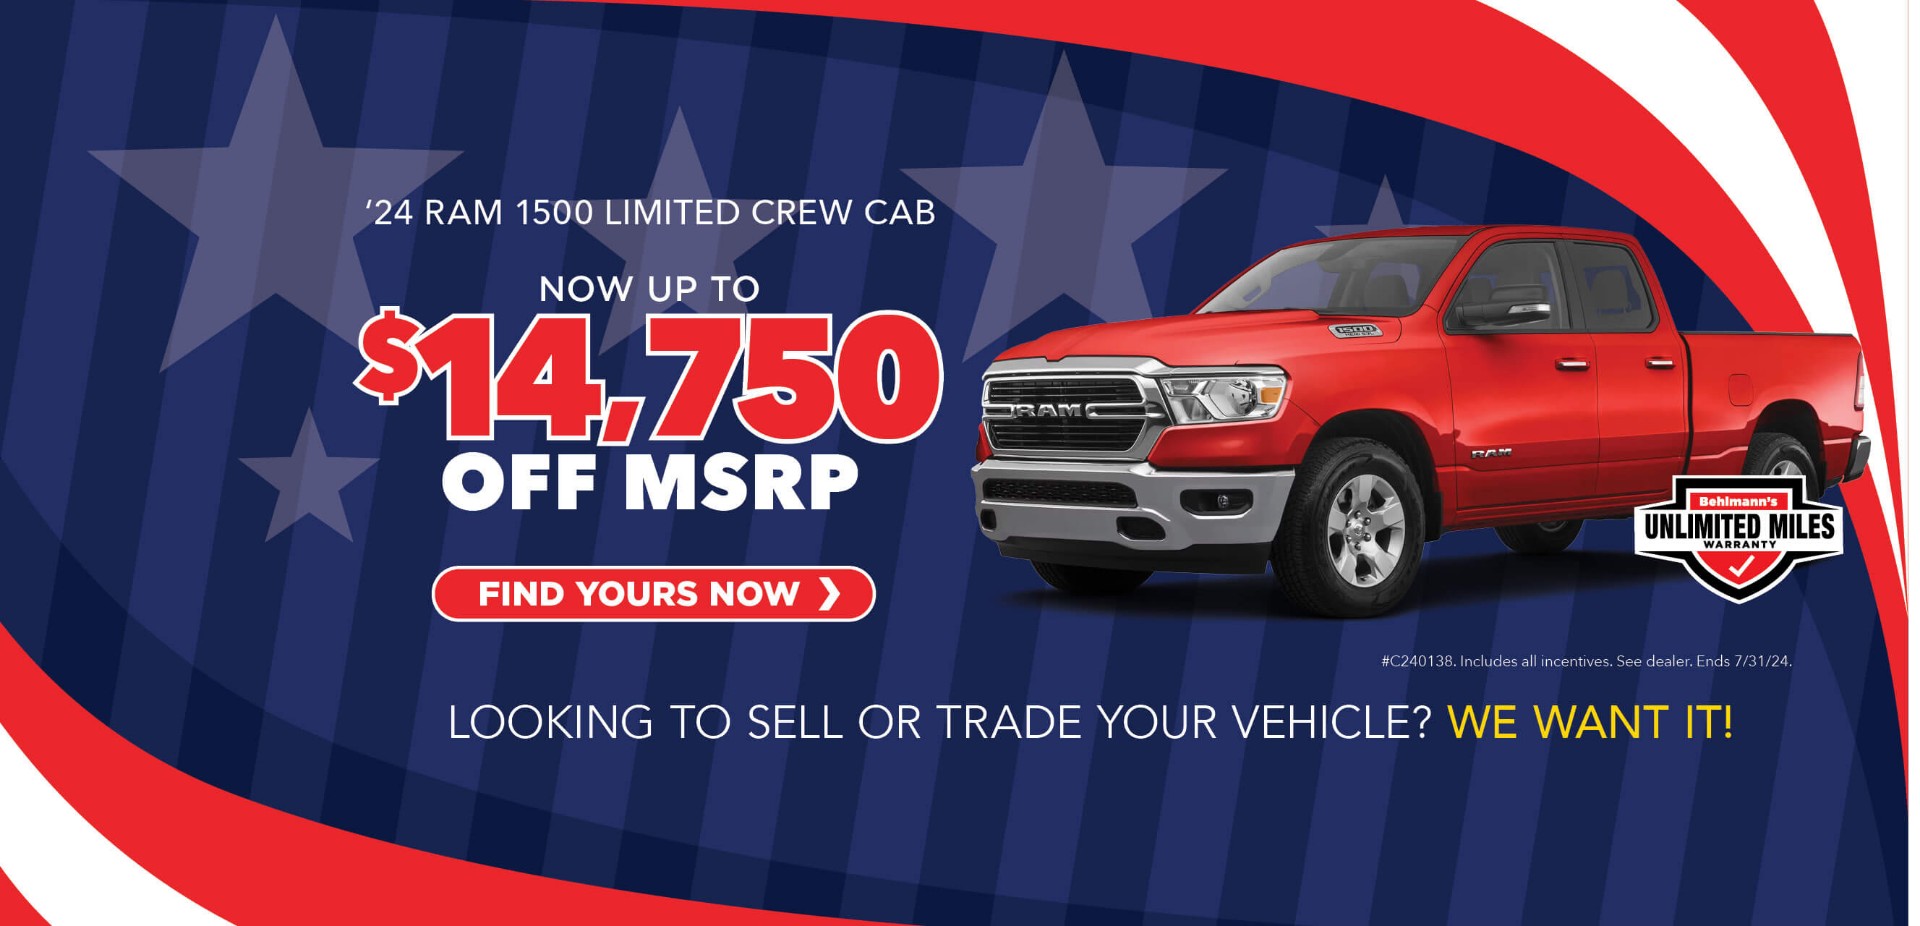 Red pickup truck with advertising slogans: Behlmann Discount, now up to $14,750 off MSRP on 2024 Ram 1500 Limited Crew Cab.